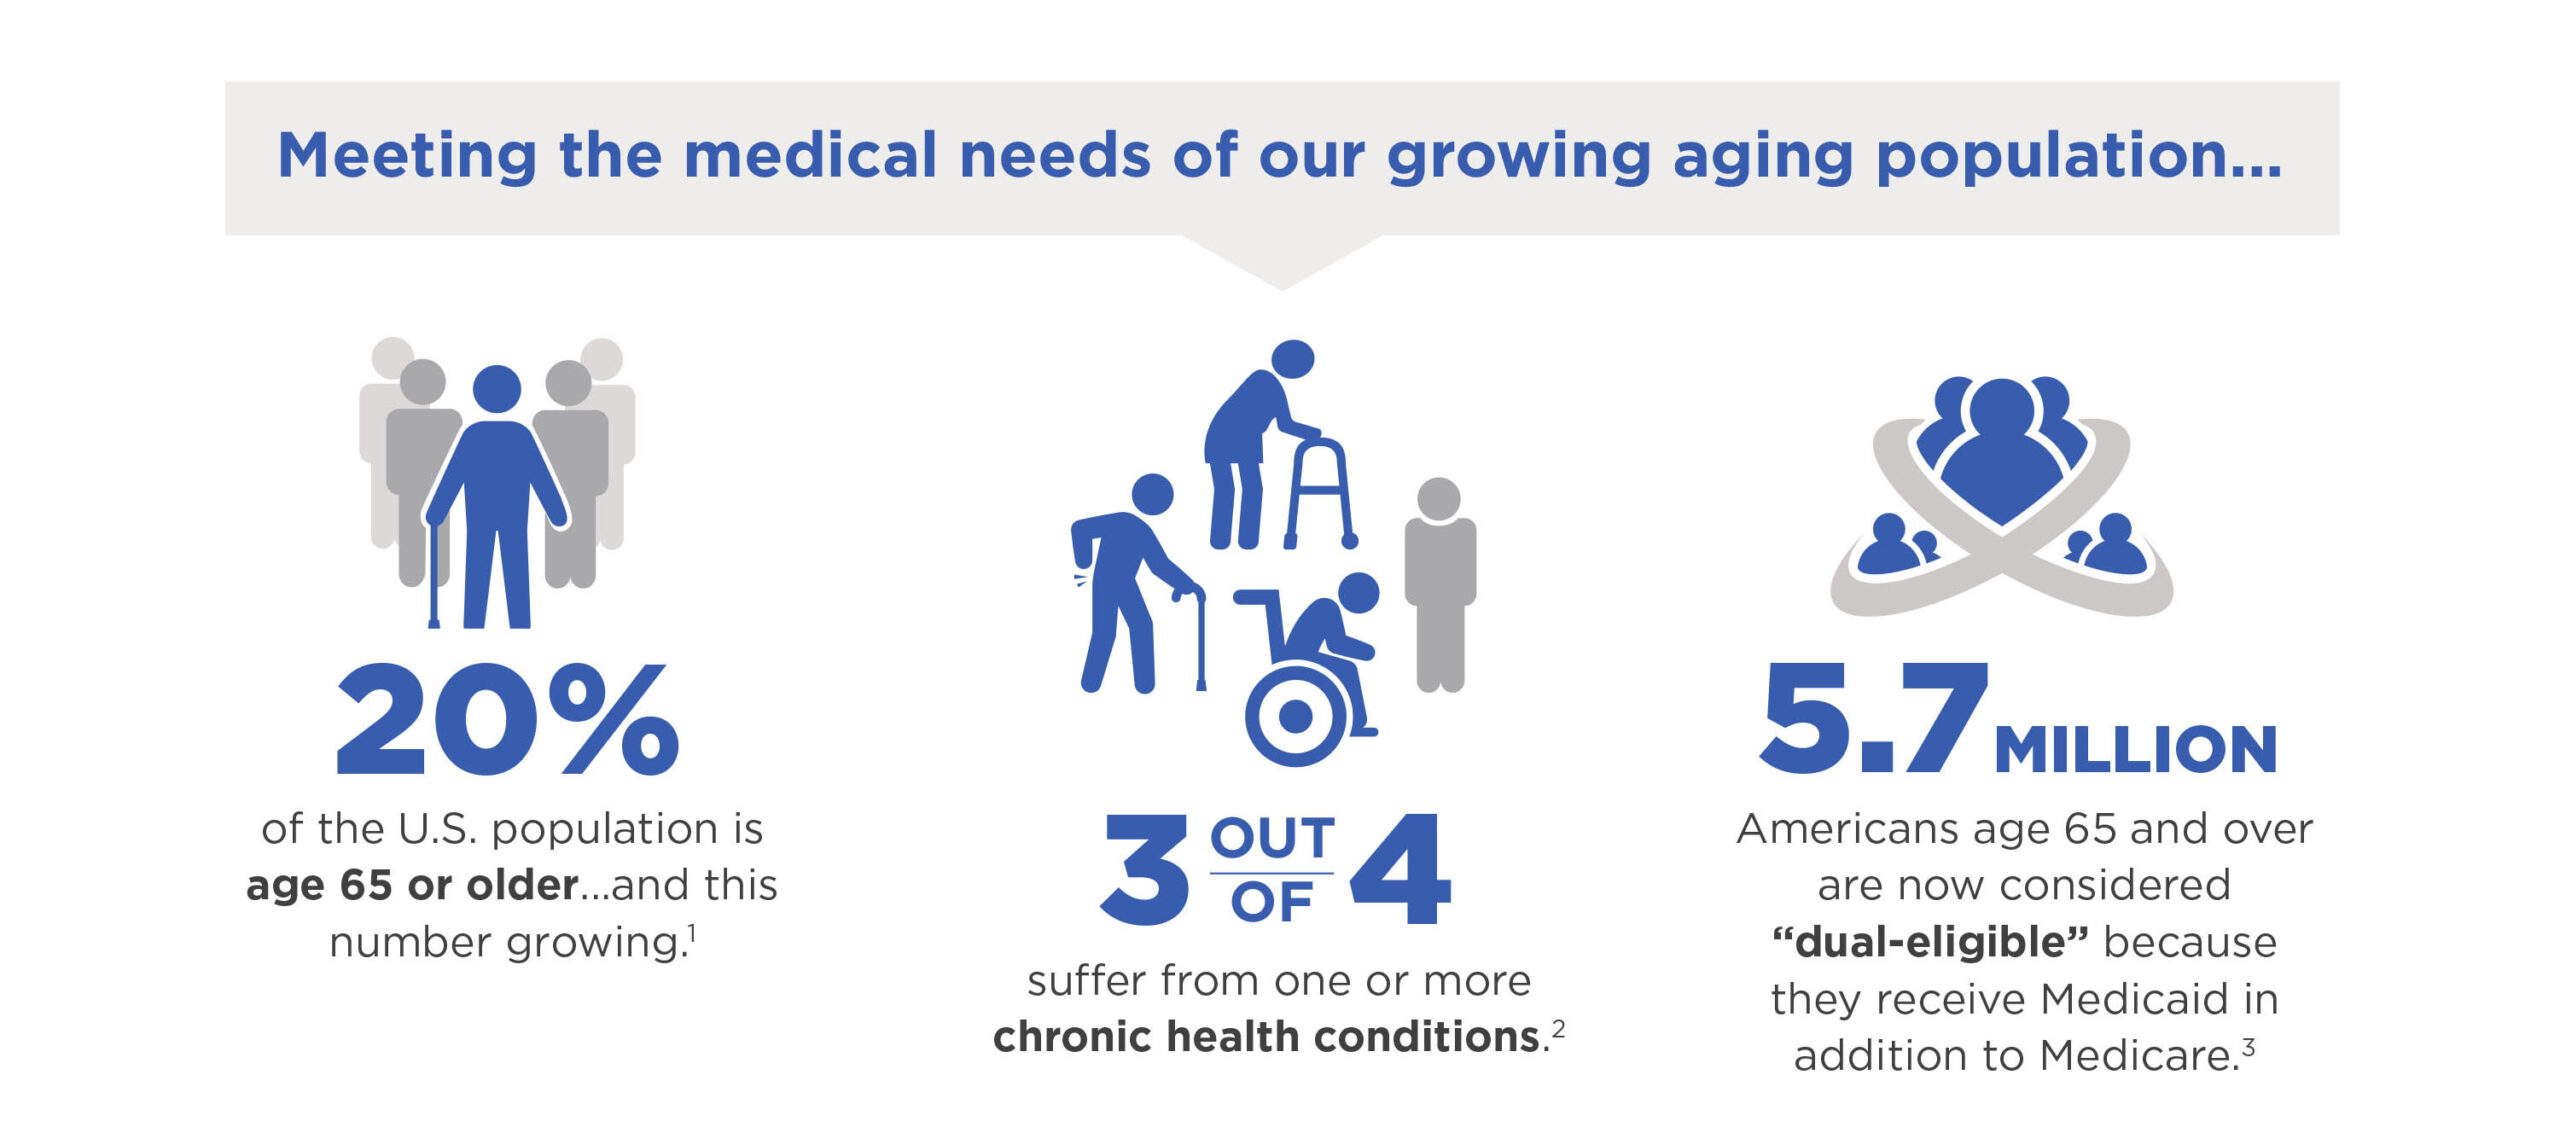 Graphic depicting meeting the needs of a growing aging population